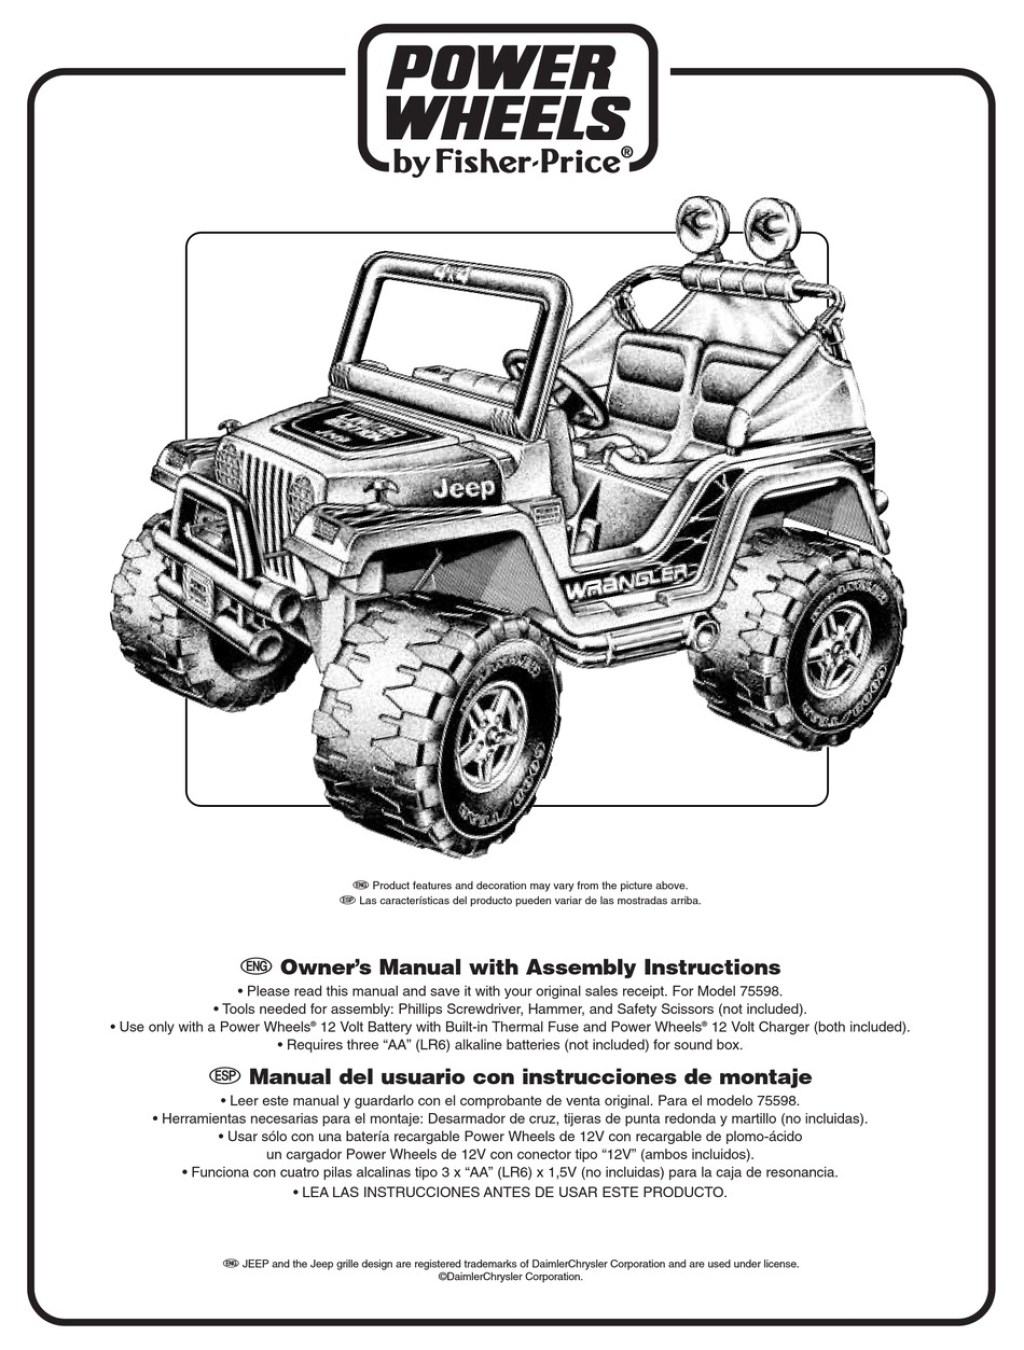 Picture of: FISHER-PRICE POWER WHEELS JEEP WRANGLER OWNER’S MANUAL WITH